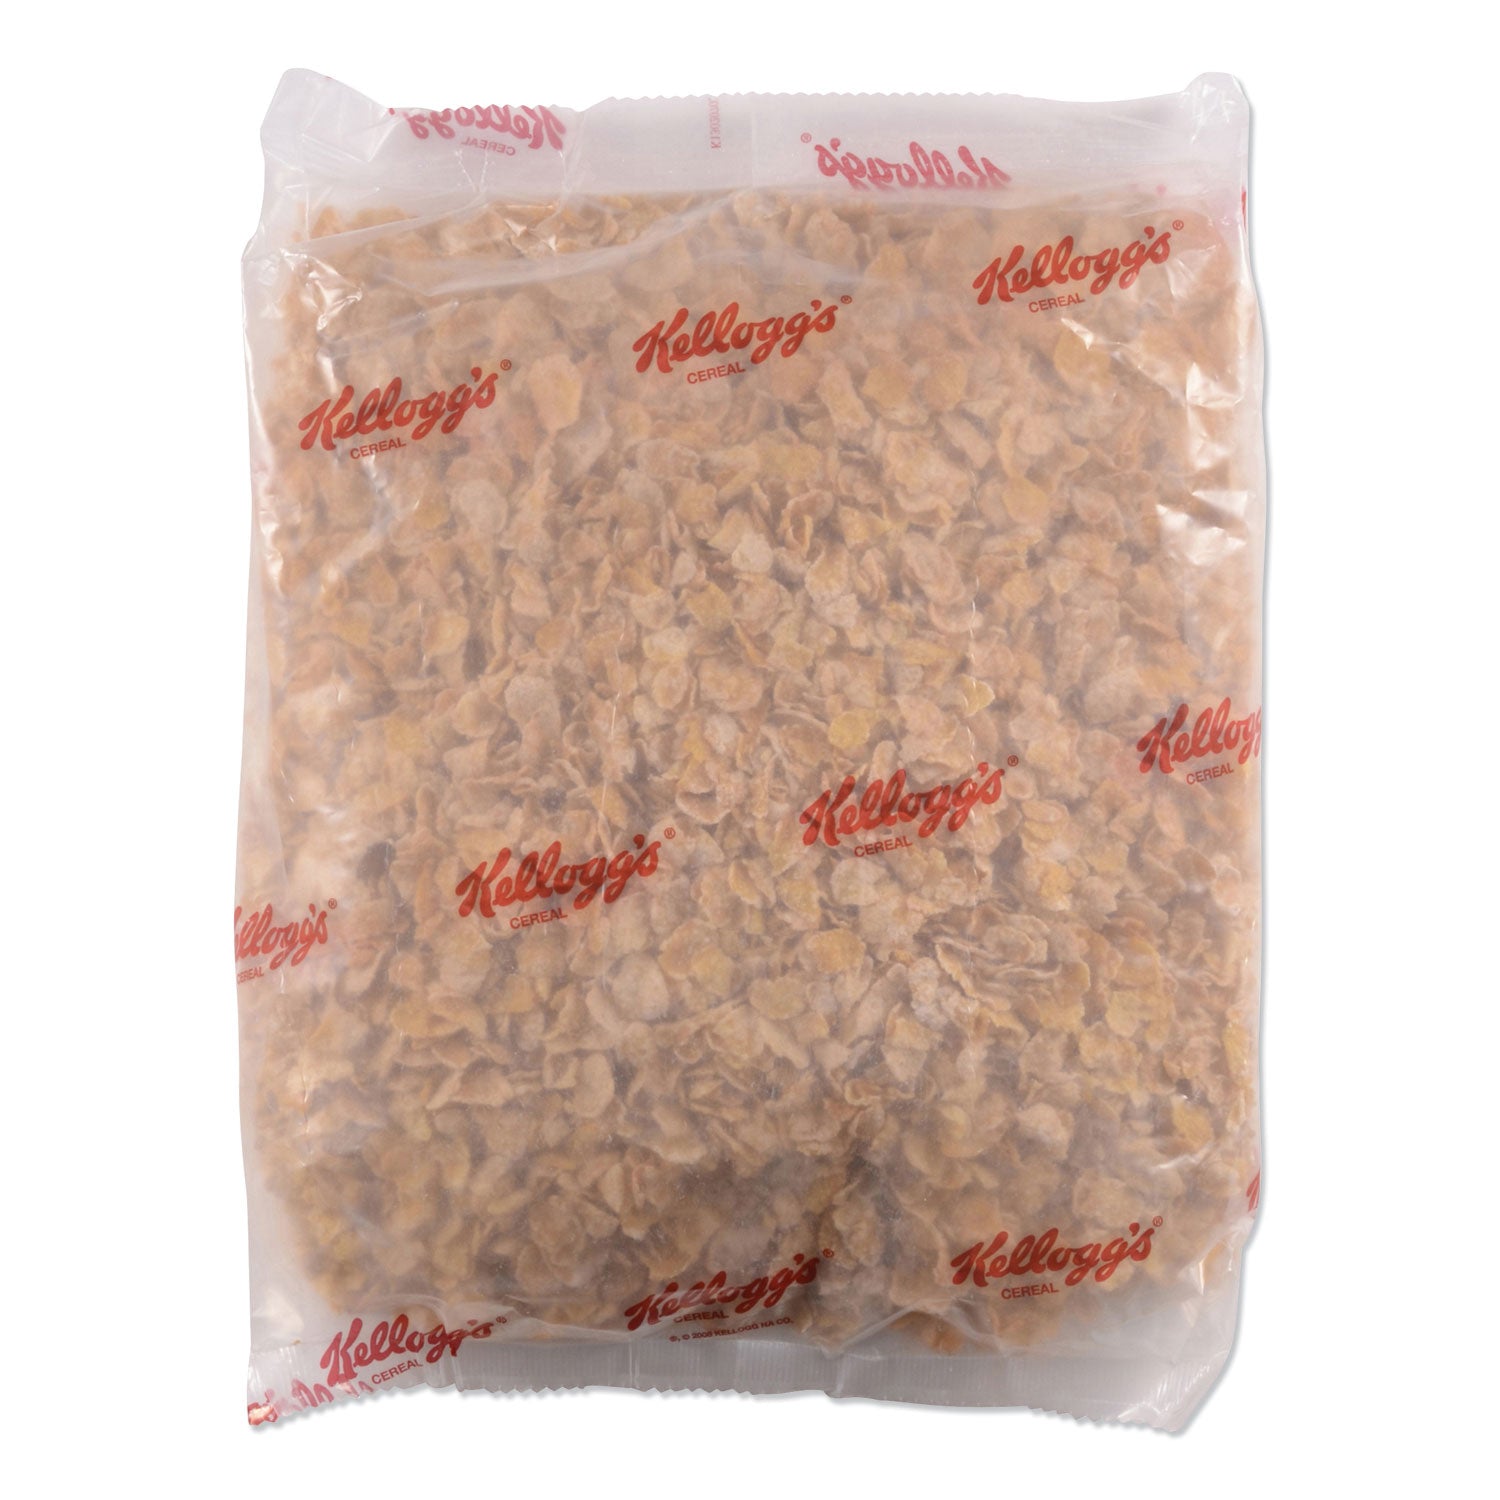 frosted-flakes-breakfast-cereal-bulk-packaging-40-oz-bag-4-carton_keb021838 - 2